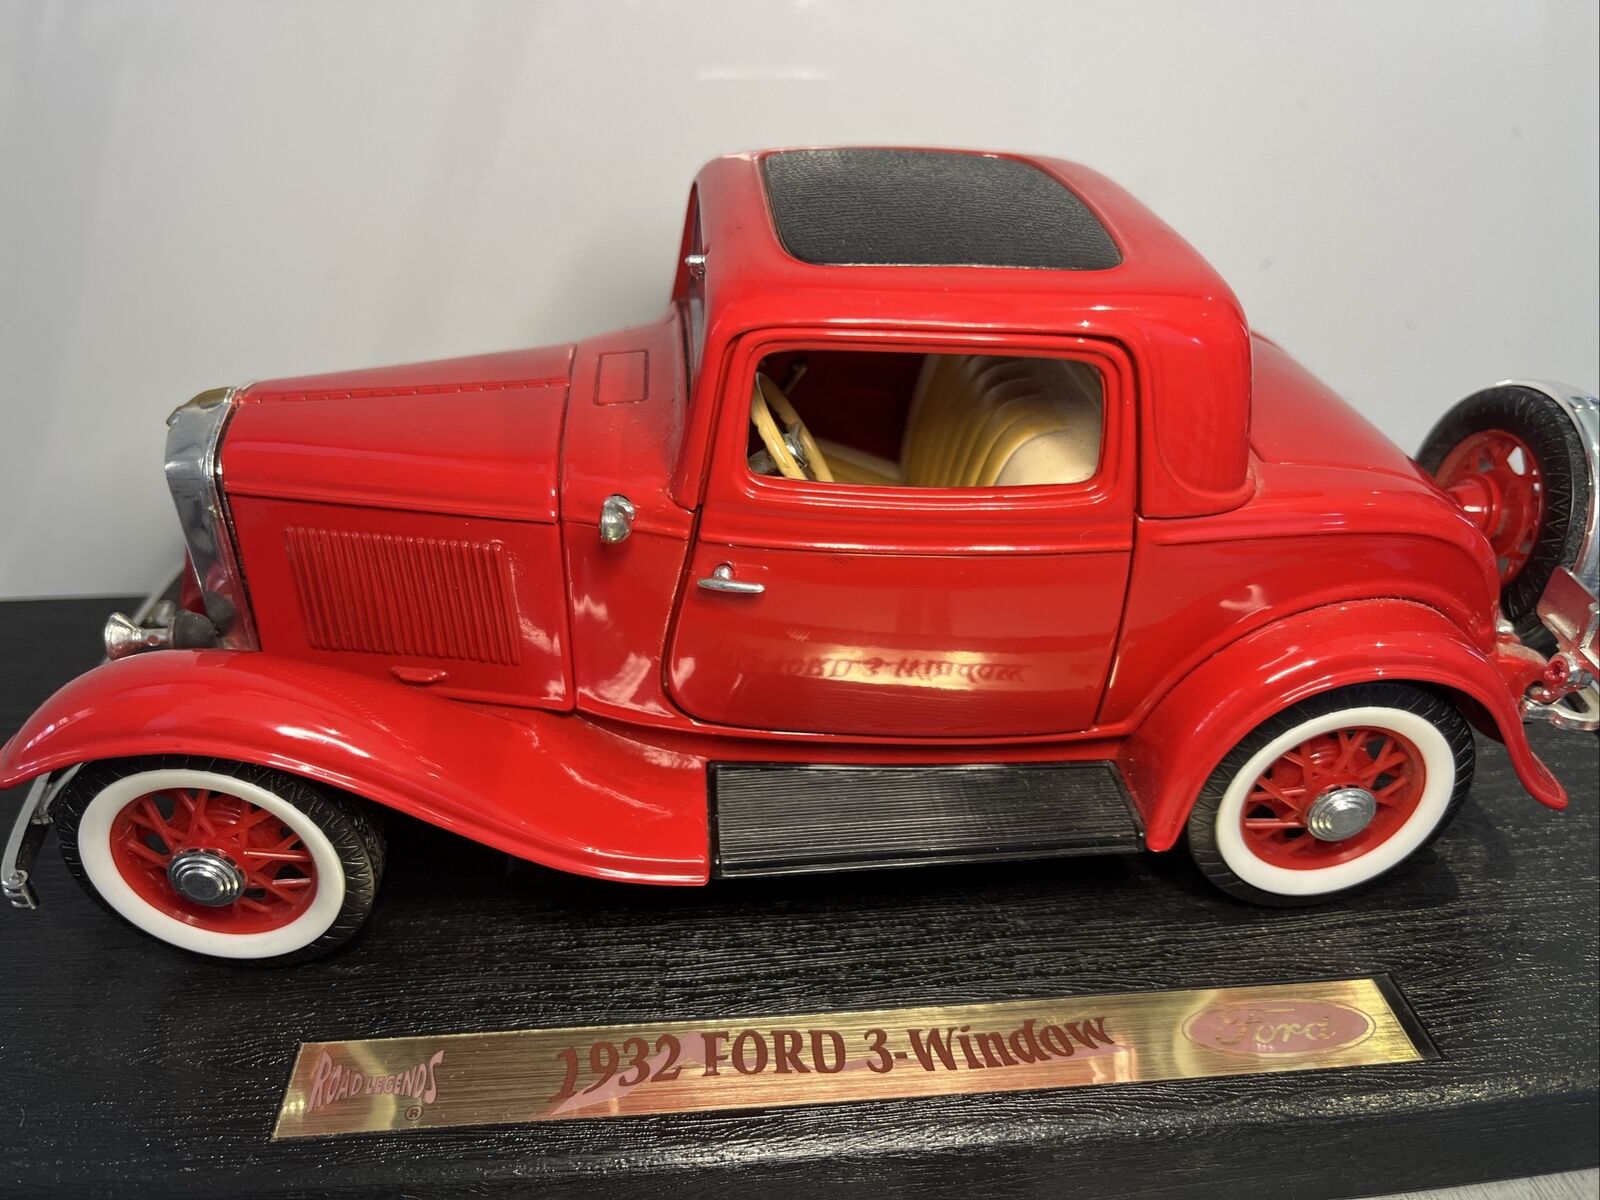 1932 Ford 3 - Window Road Legends Car Vintage Figurine Collectable.